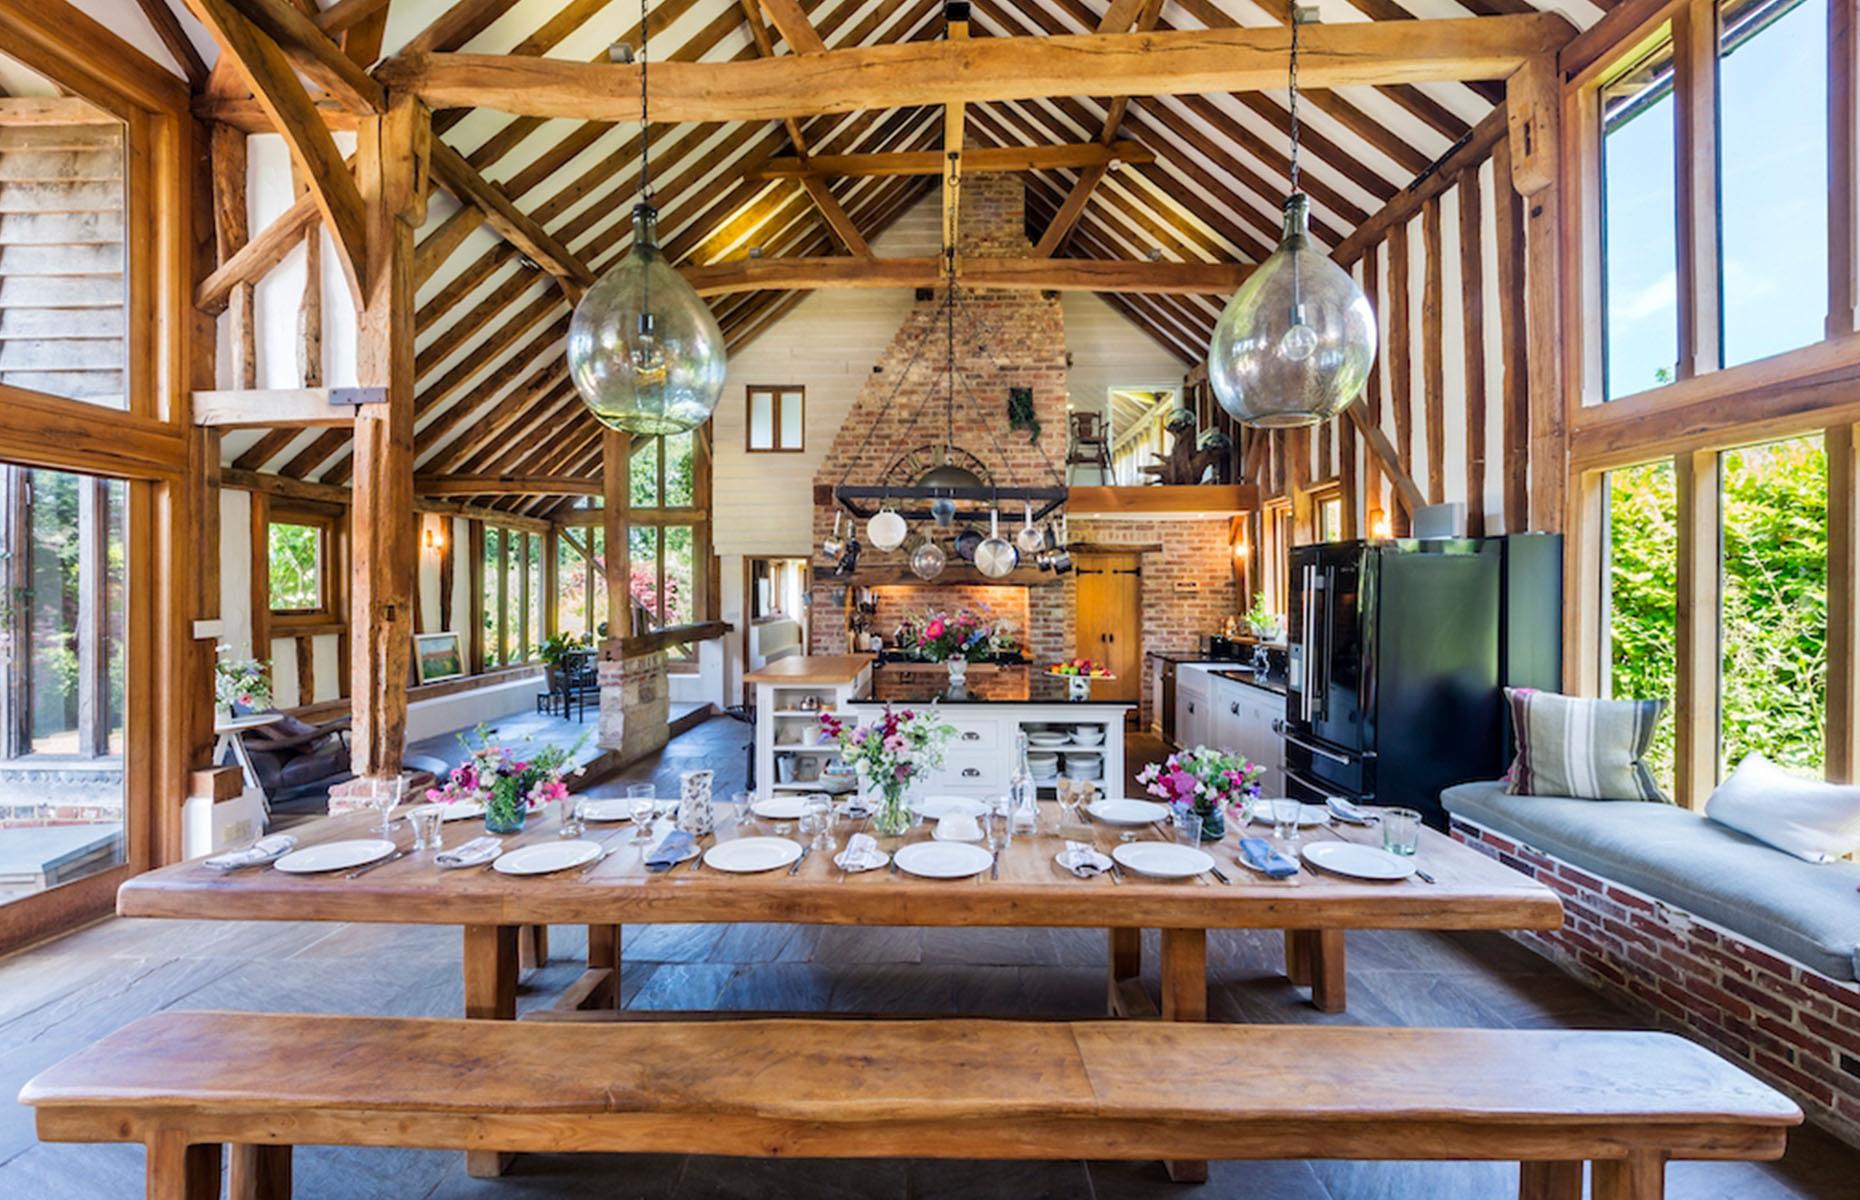 <p>If your open-plan space has characterful features like exposed beams or support columns, don't try to disguise them. Instead, let these architectural quirks enhance your scheme for a completely unique interior. In this <a href="https://www.loveproperty.com/gallerylist/64656/10-breathtaking-barn-conversions">beautiful barn conversion</a>, characterful woodwork and an original brick hearth frame a charming country-style living space.</p>